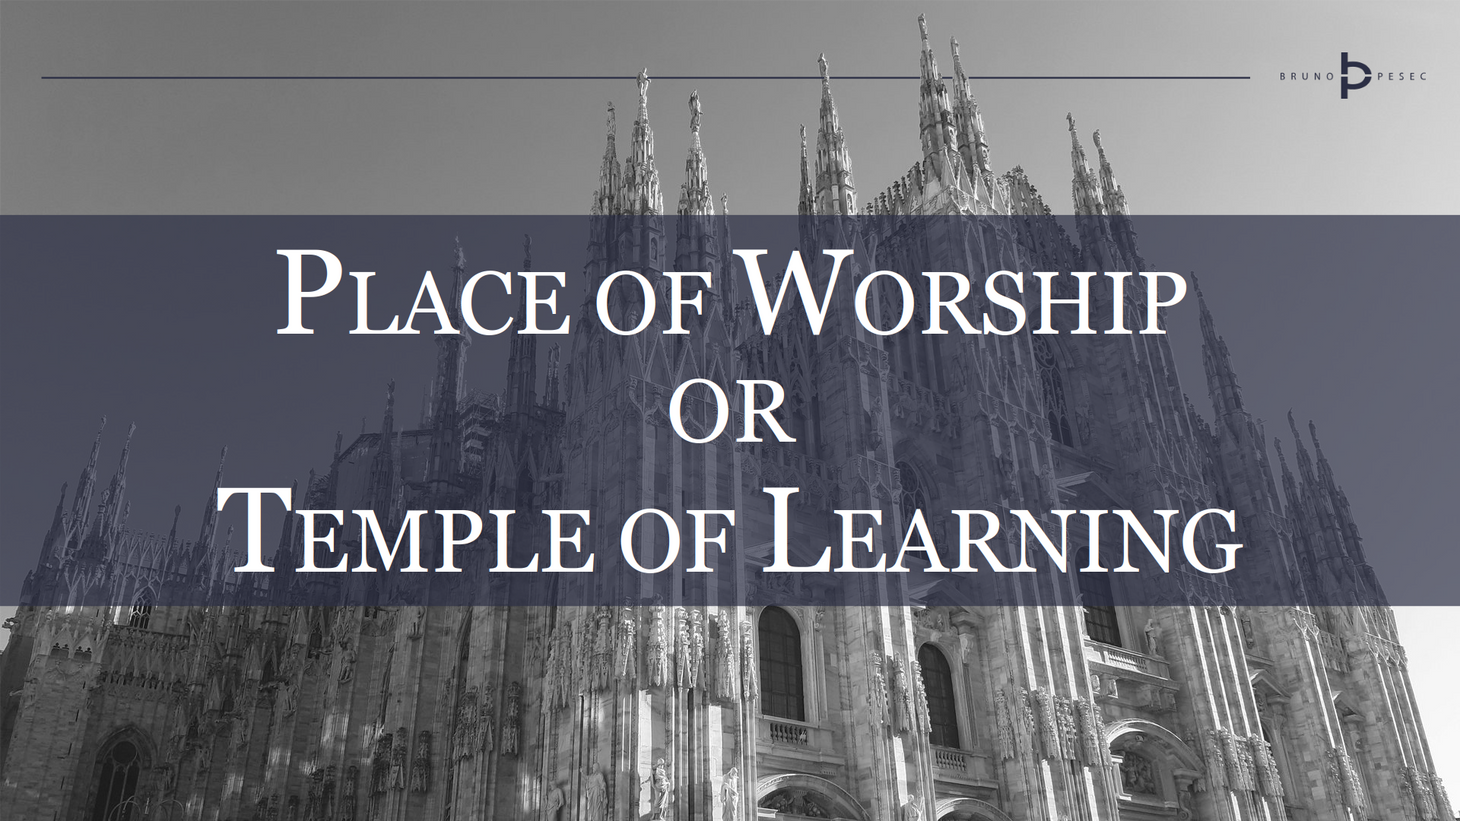 Place of worship or temple of learning?